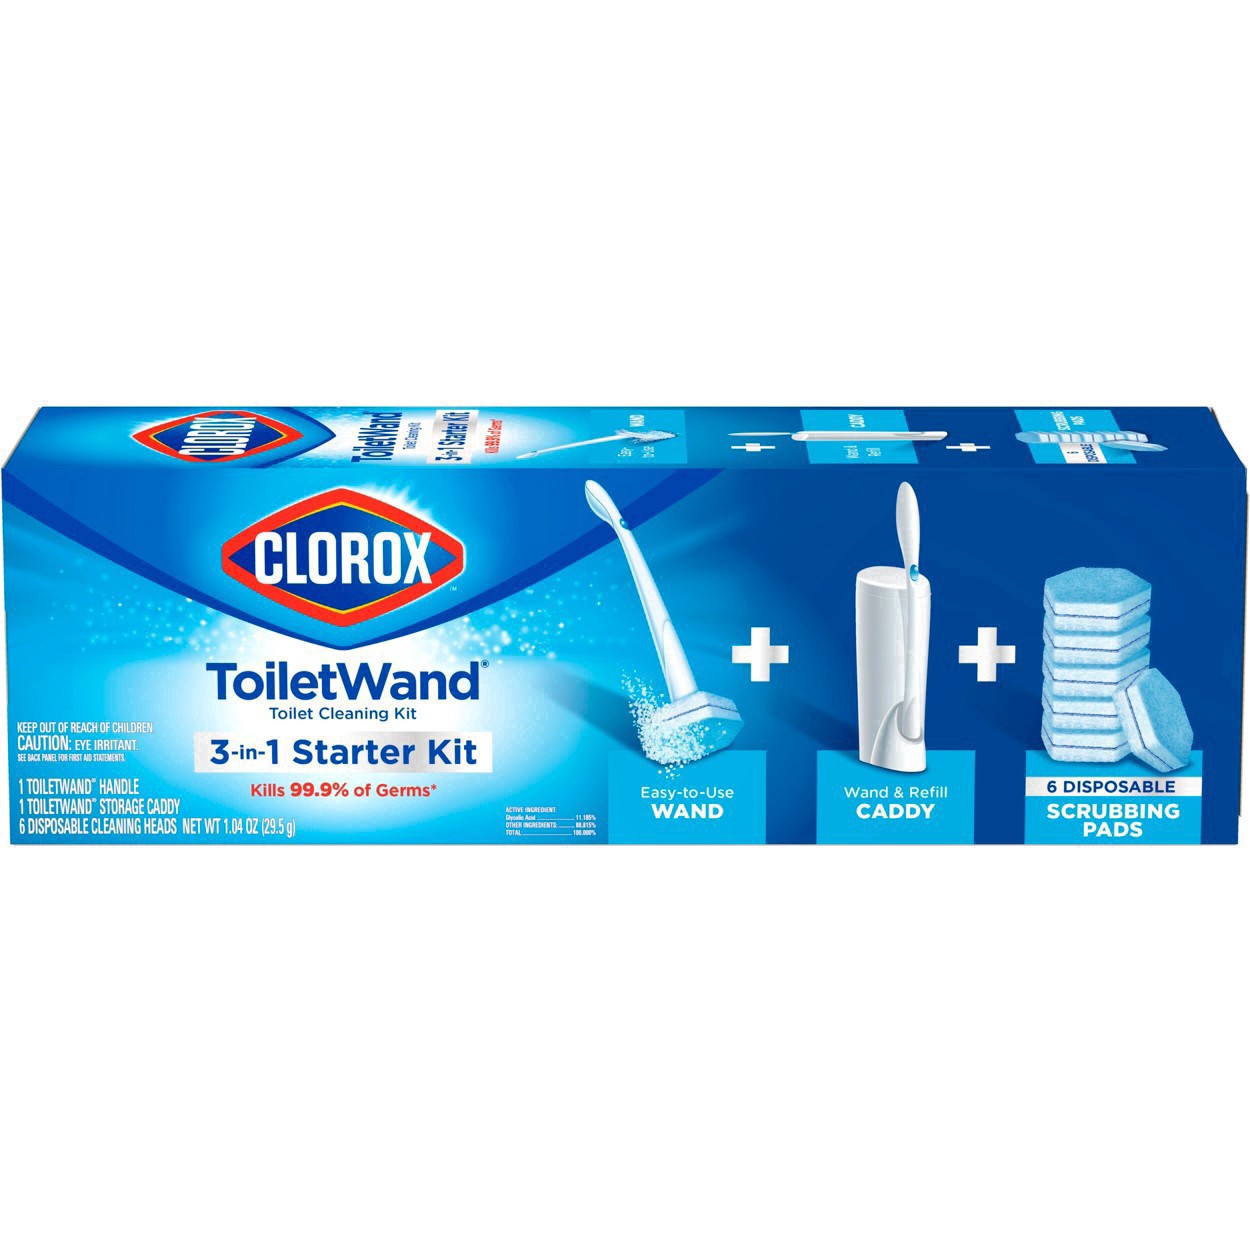 slide 53 of 176, Clorox Toilet Wand 3-in-1 Starter Toliet Cleaning Kit, 1 ct